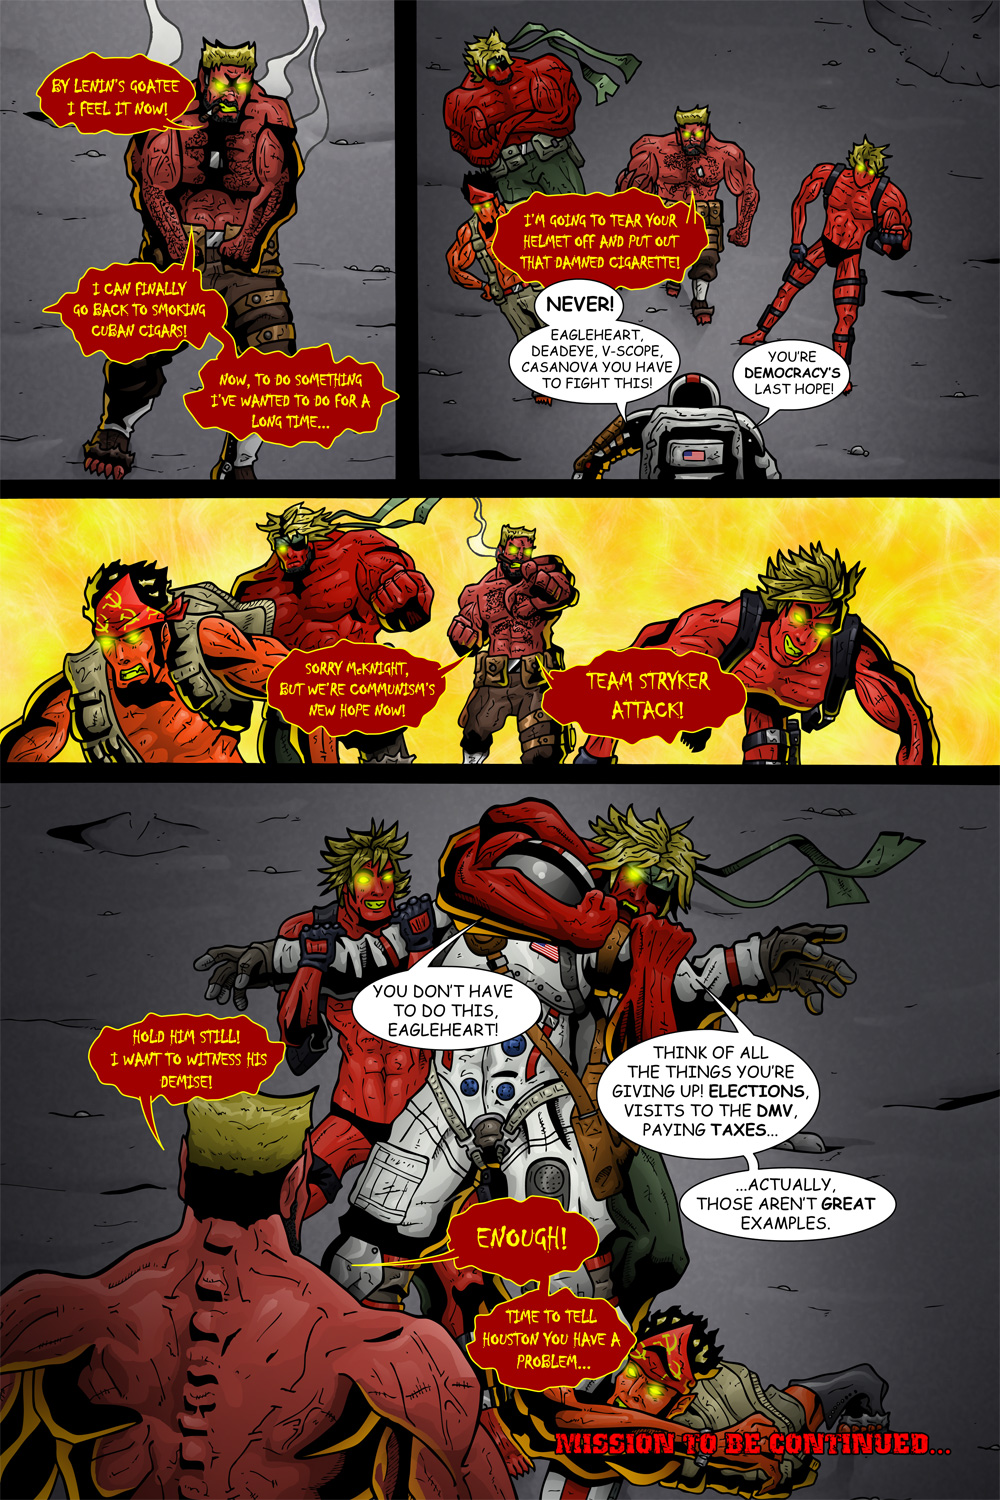 MISSION 006: PAGE 23 “DEMOCRACY’S LAST HOPE”